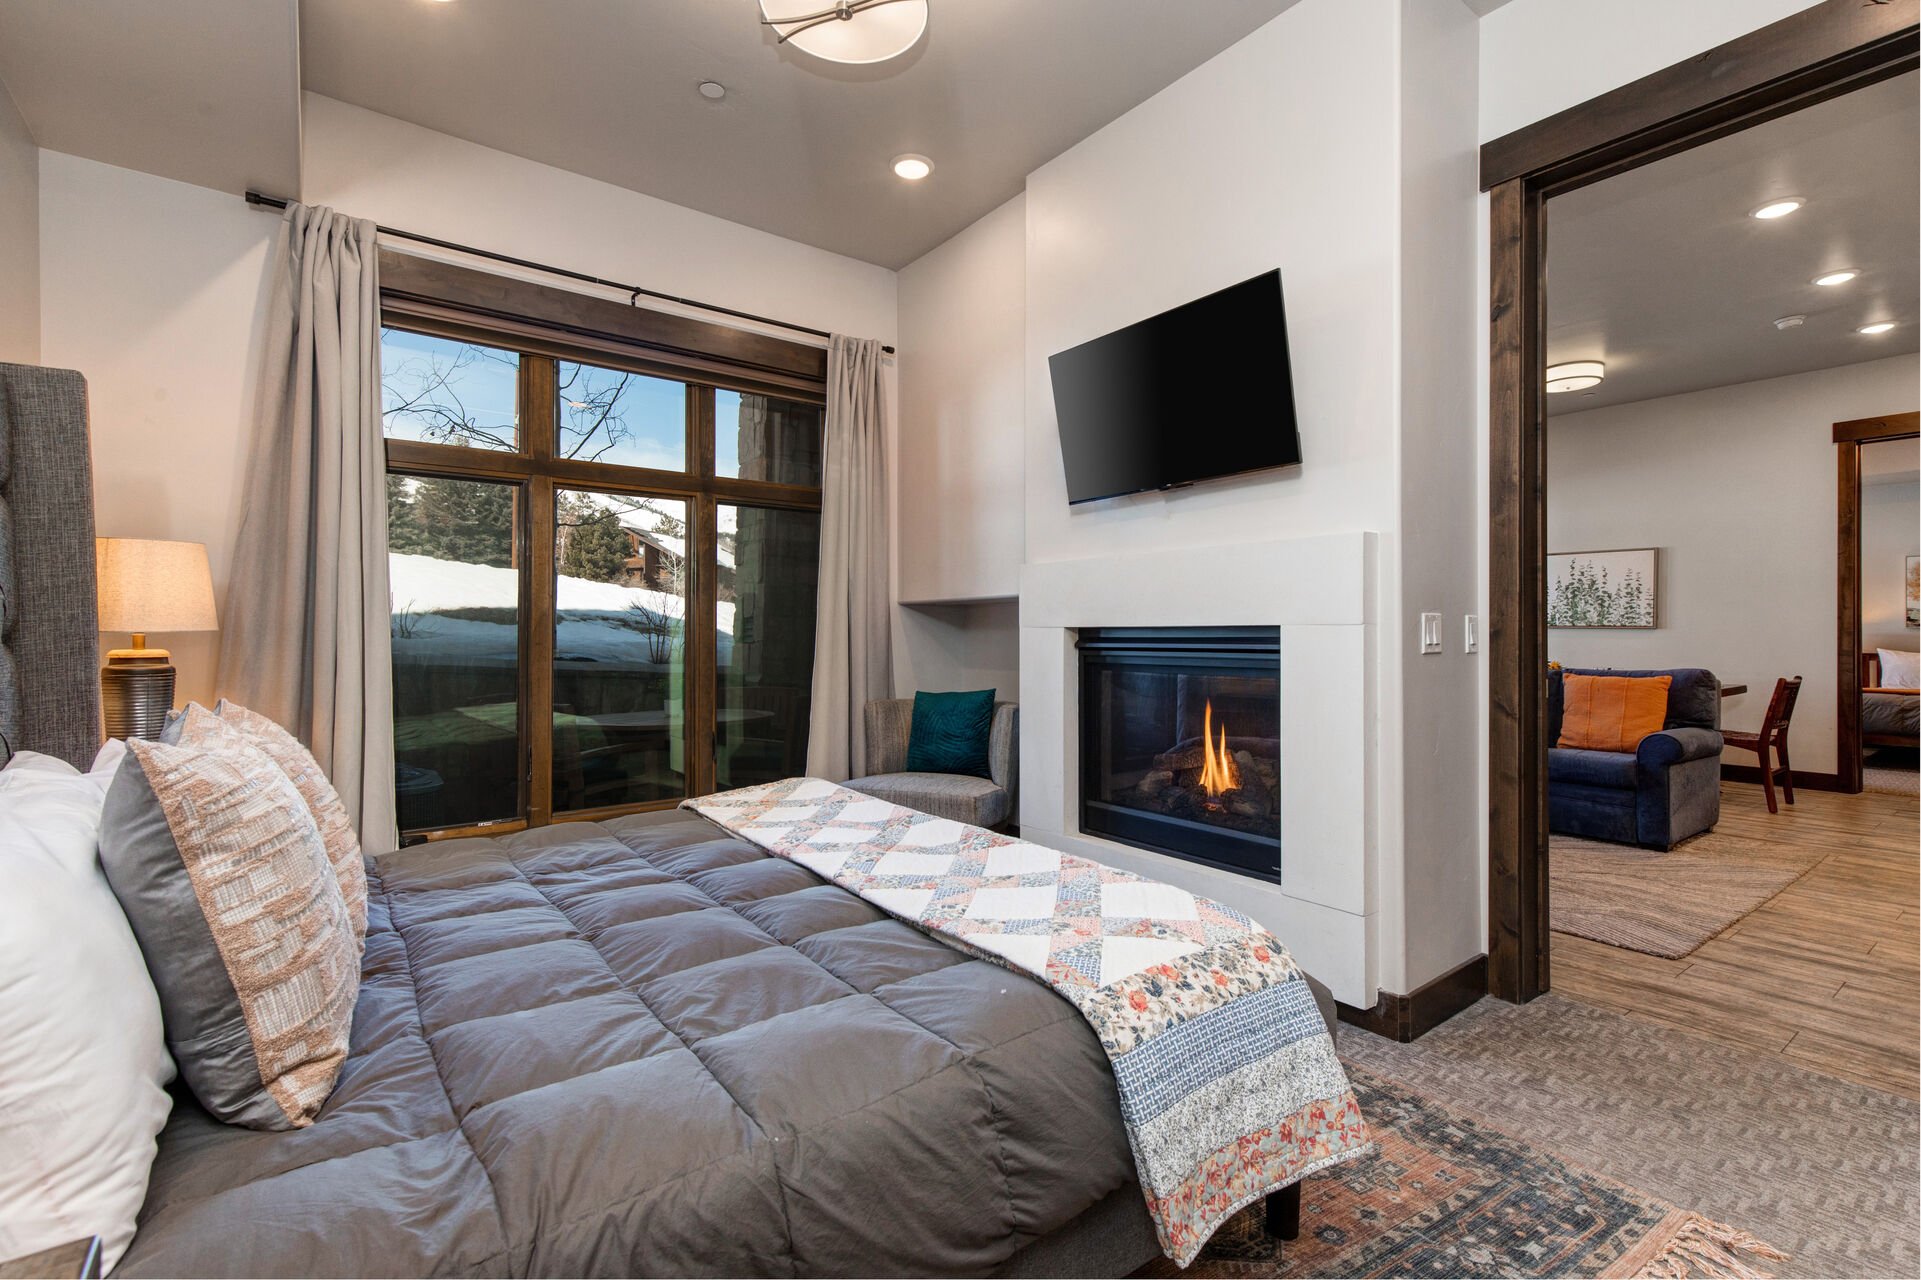 Master bedroom with king bed, ensuite bathroom and mountain views